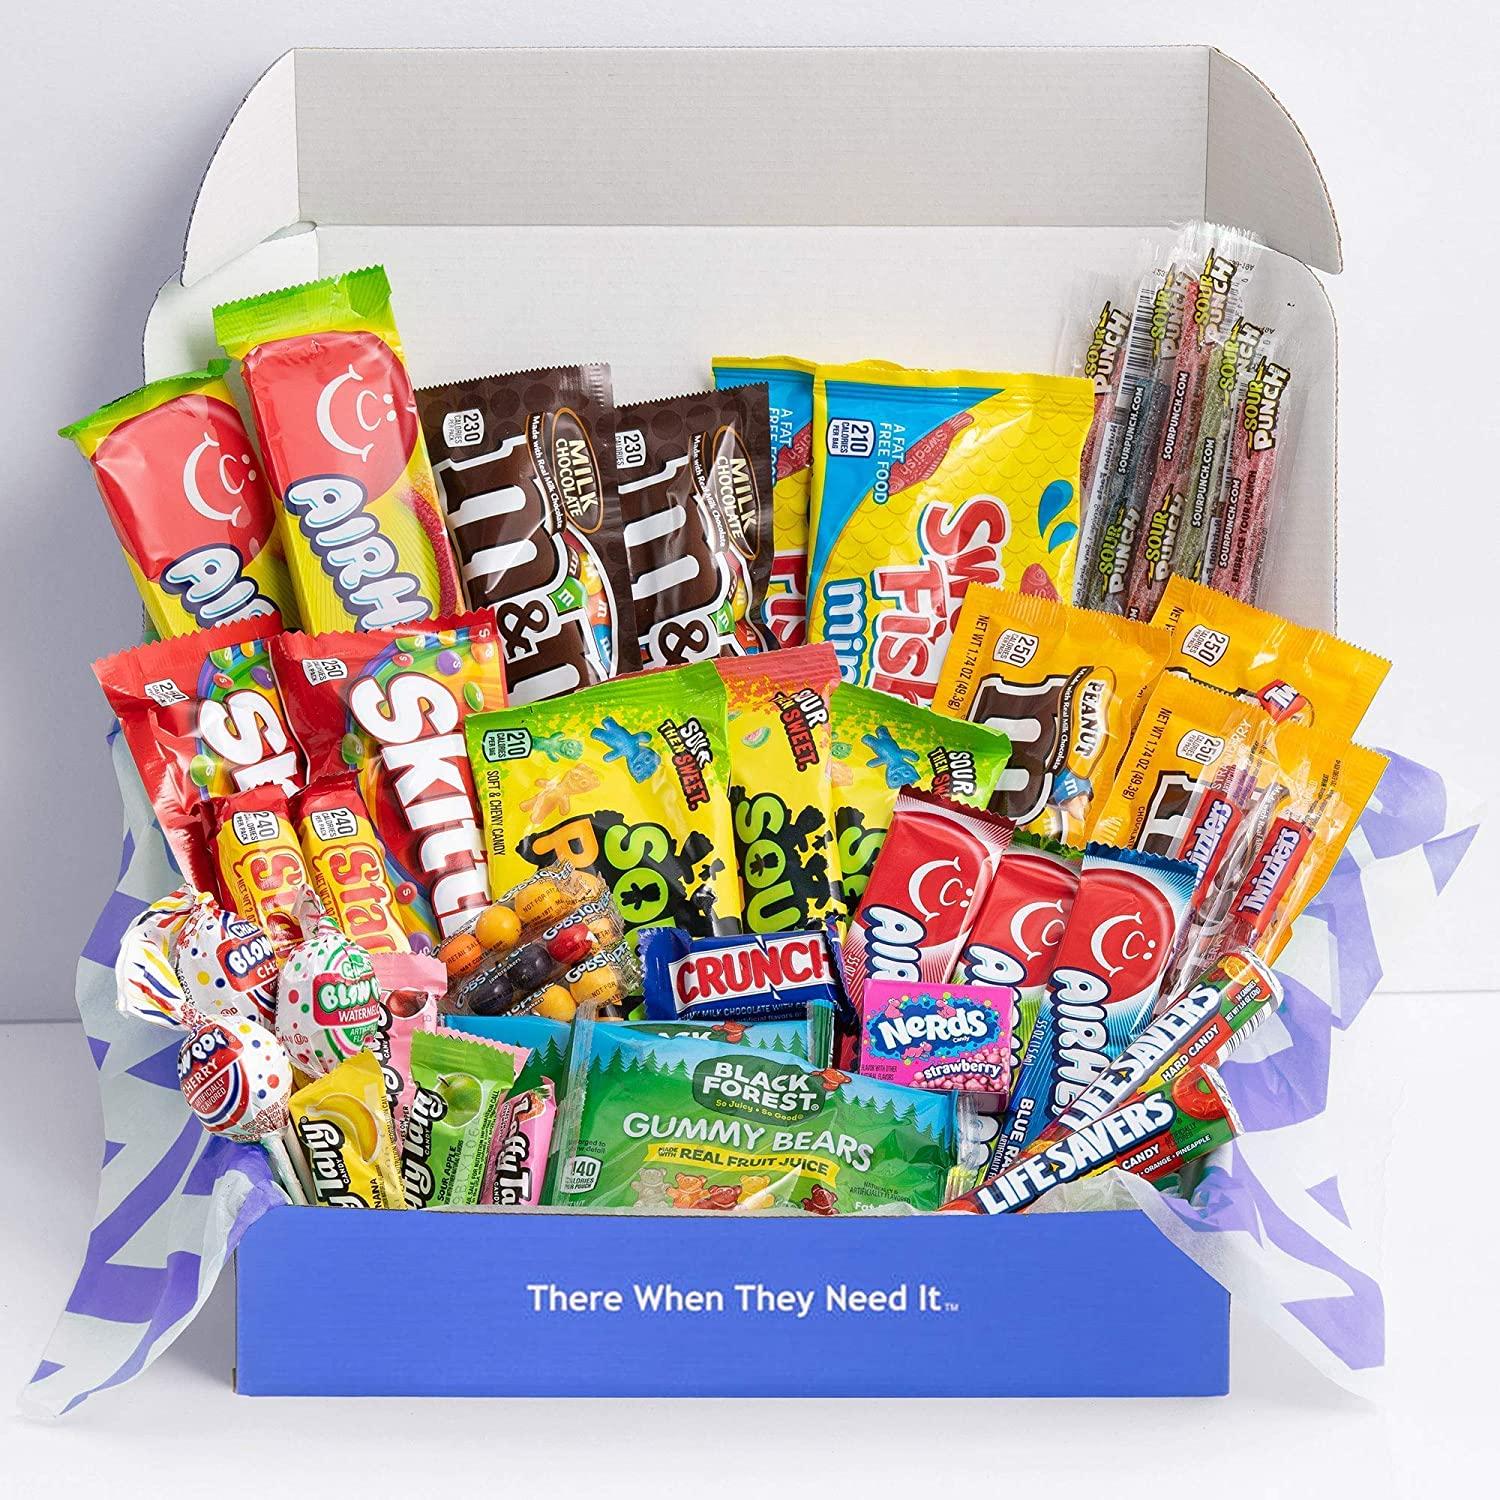 My College Crate Candy & Snack Box Ultimate Snack Care Package for College  Students - 40 piece Includes 20 Full Size Candies, Candy Variety Pack,  Starburst, Skittles, Sour Patch & More